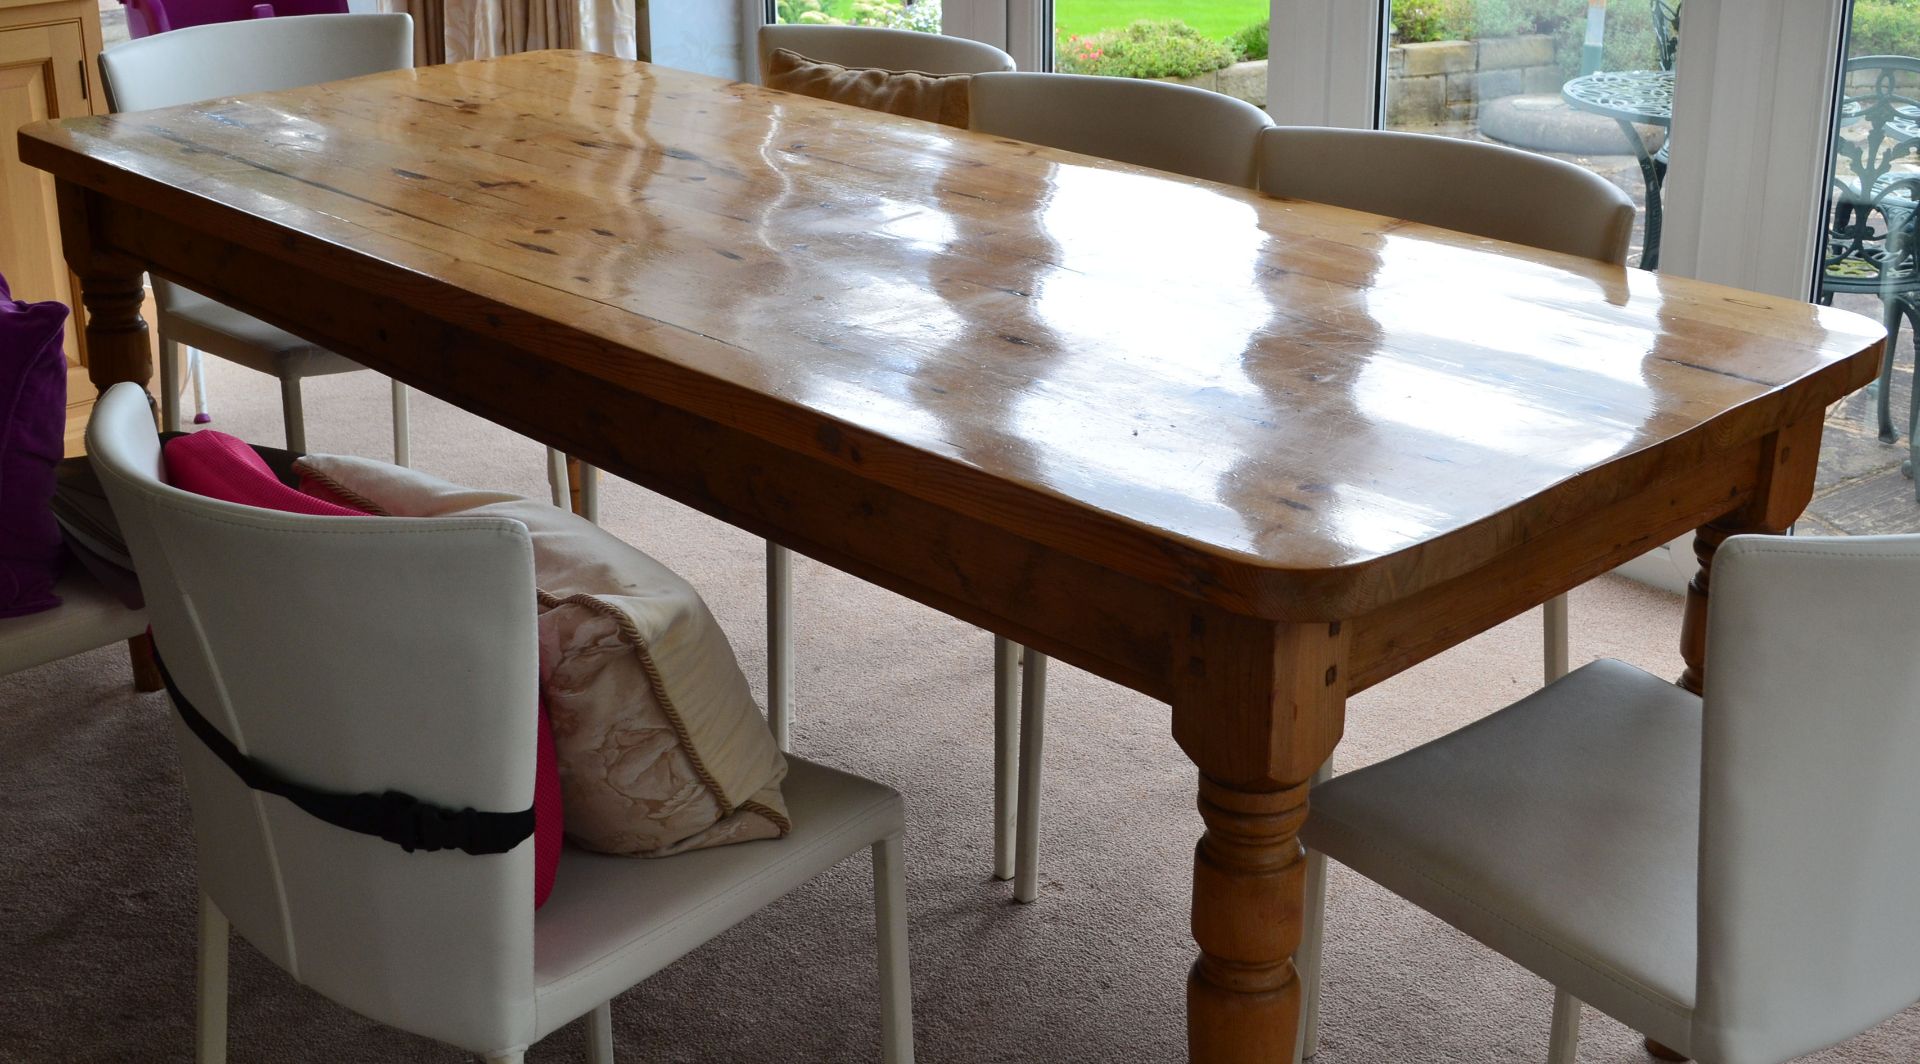 1 x Bespoke Pine Dining Table Made From Reclaimed Church Pews - CL226 - Location: Knutsford WA16 - Image 4 of 9